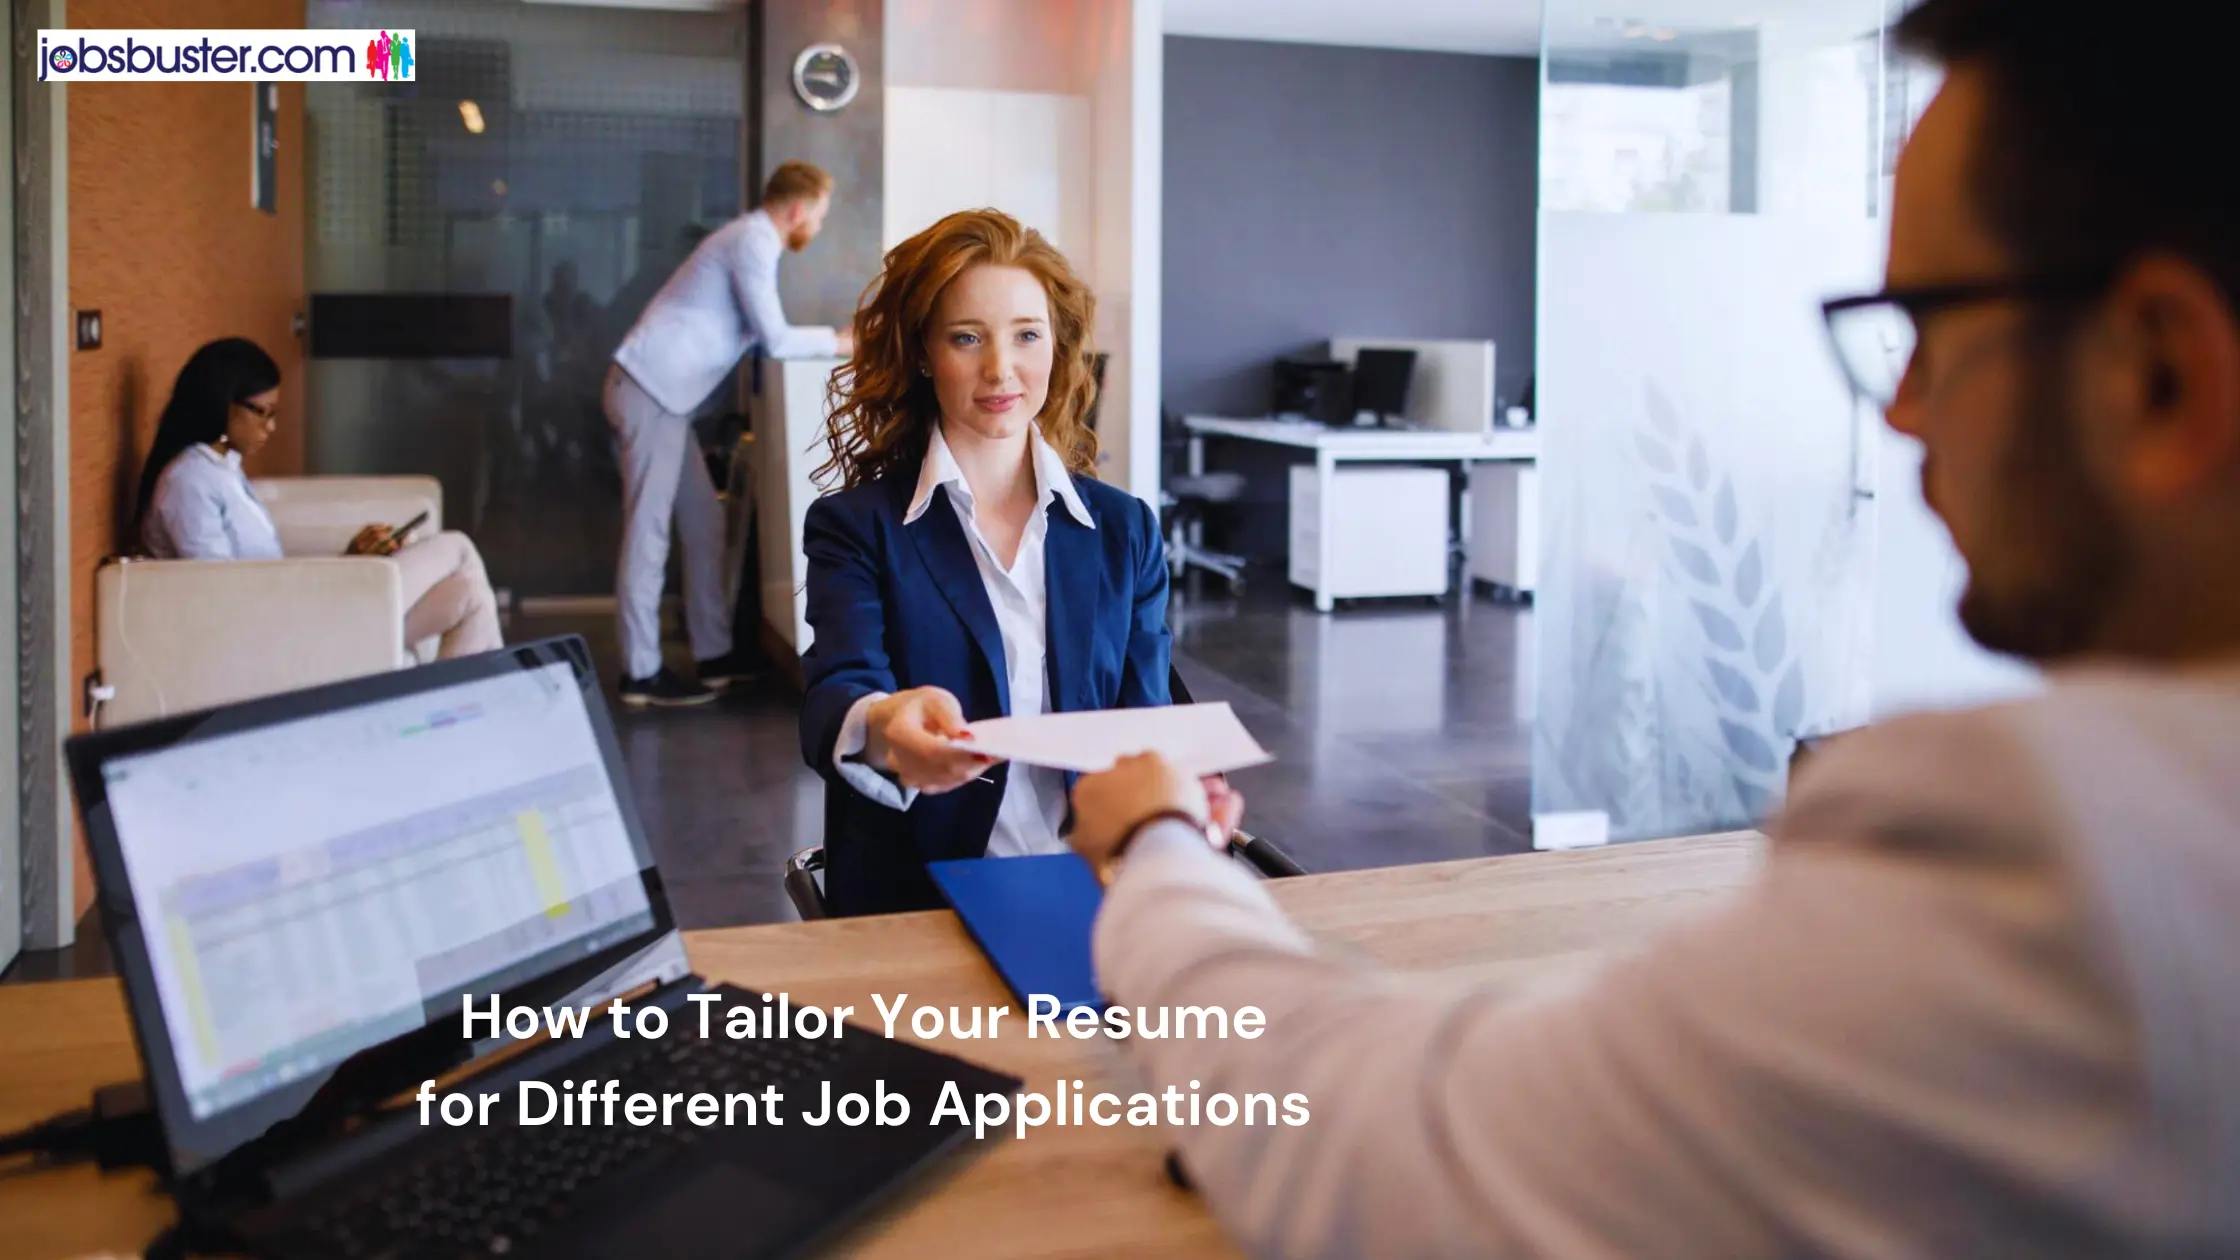 How to Tailor Your Resume for Different Job Applications